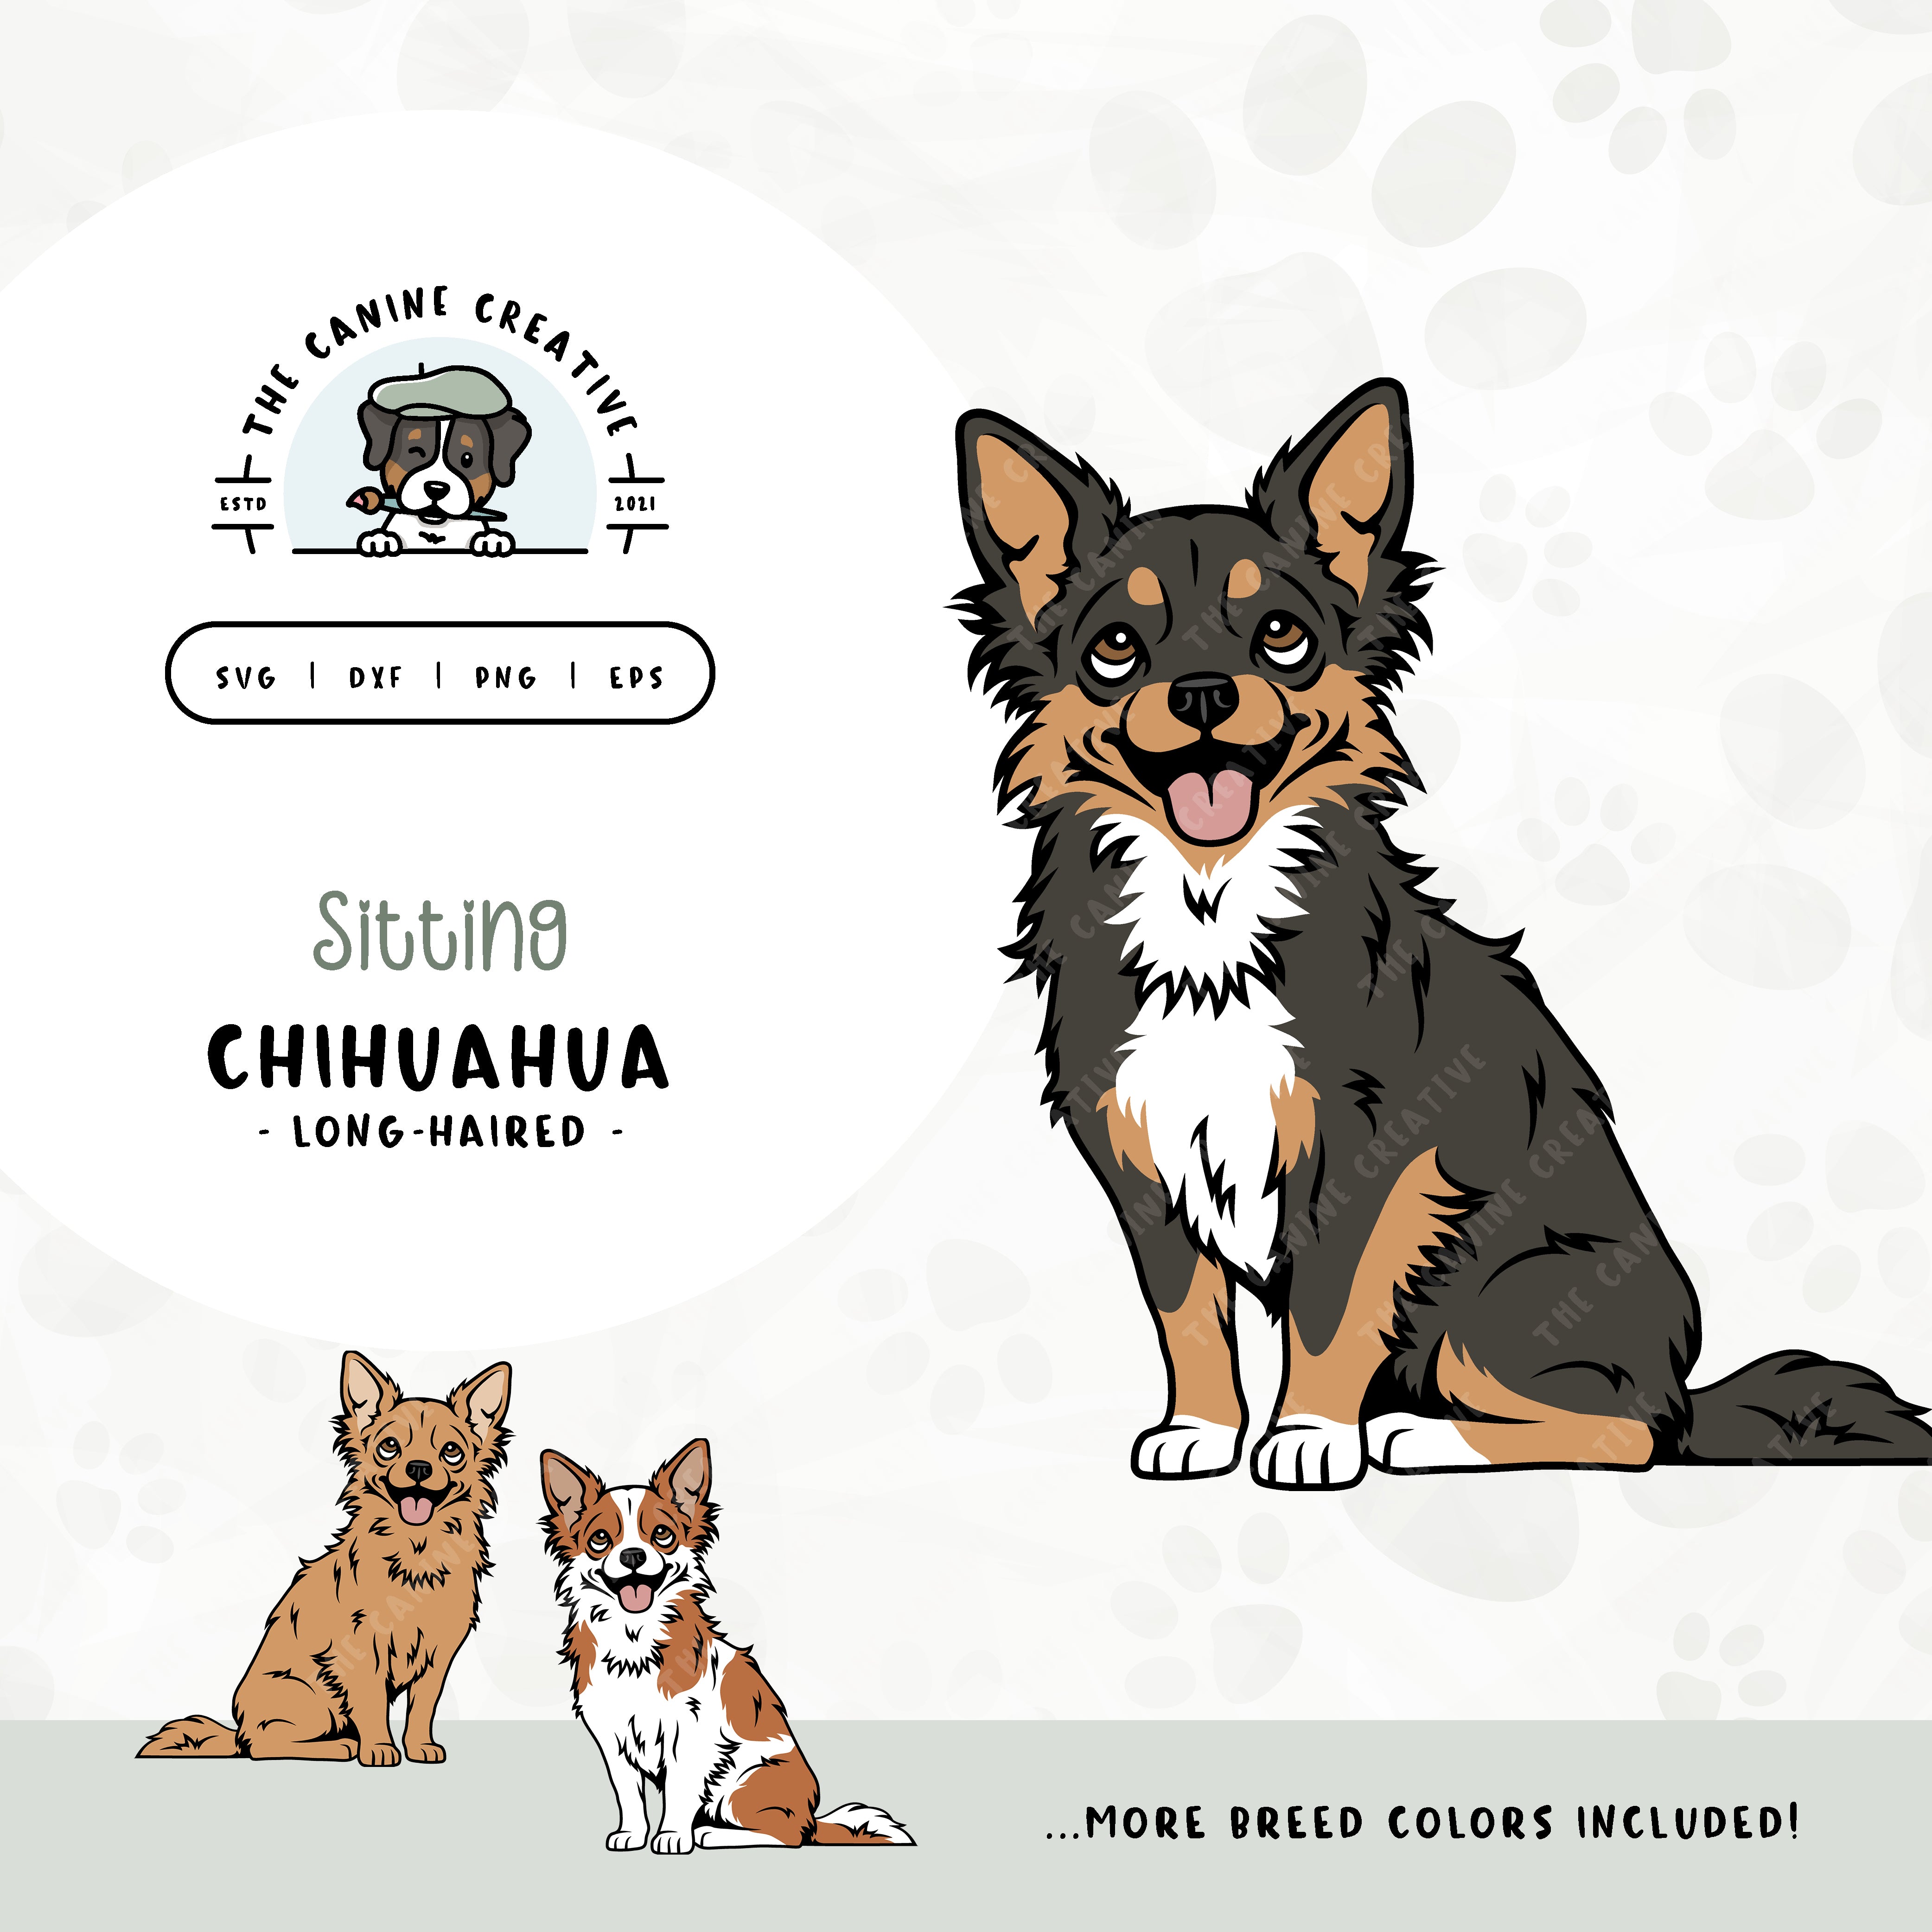 This sitting dog design features a Long Haired Chihuahua. File formats include: SVG, DXF, PNG, and EPS.